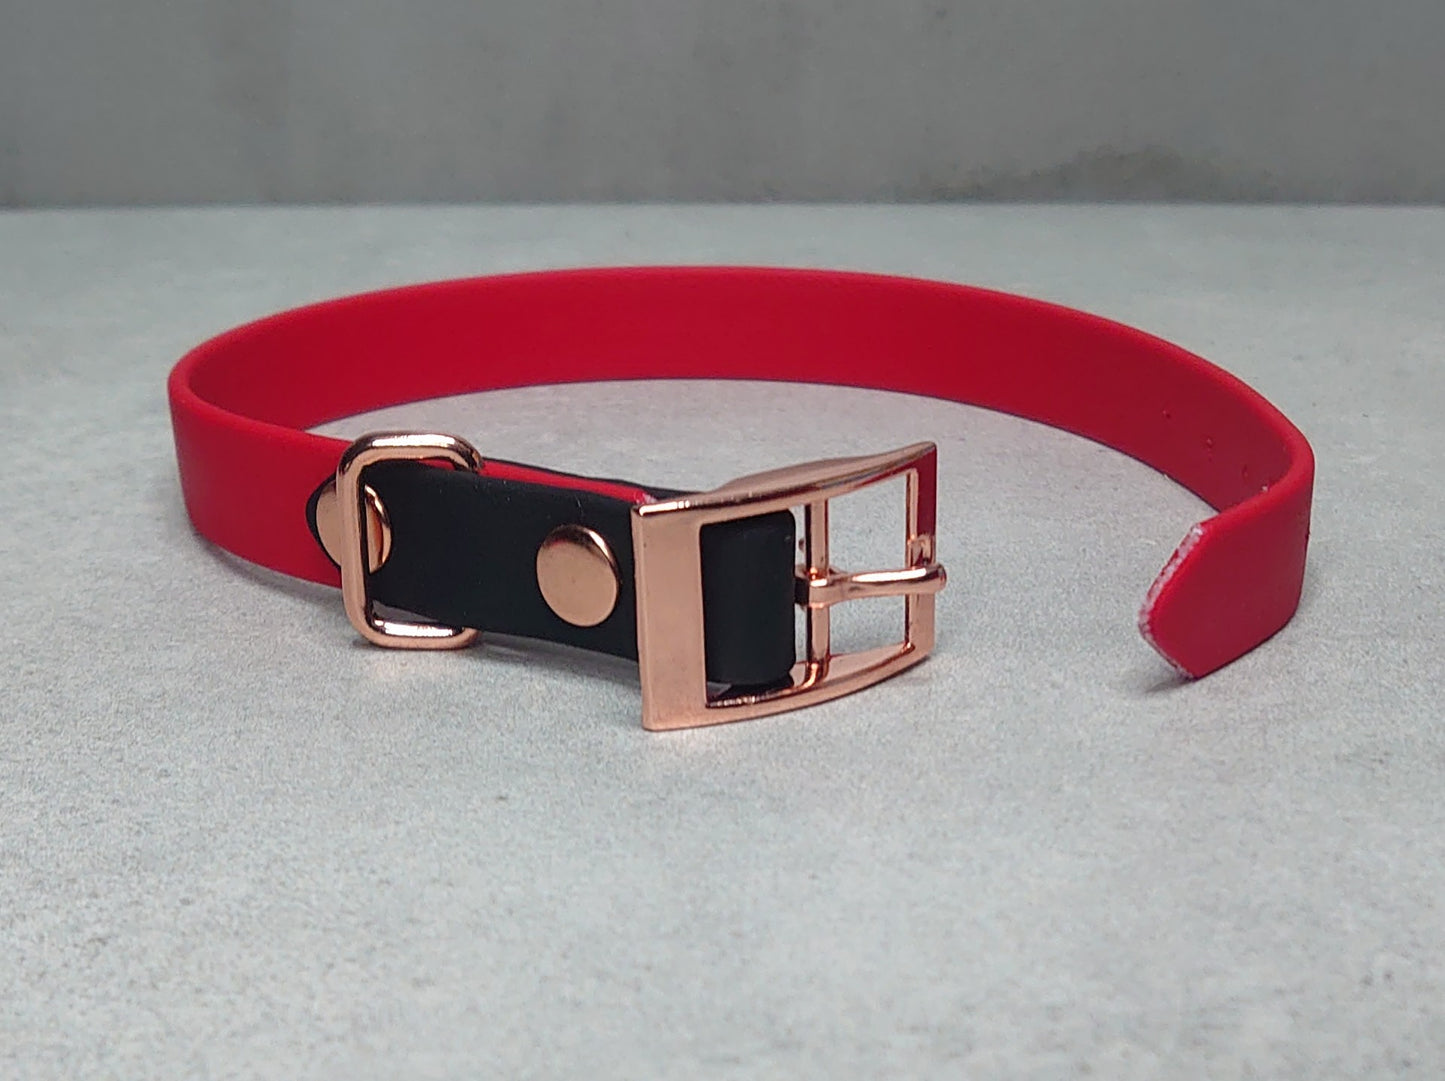 Biothane tipped collar - Design your own